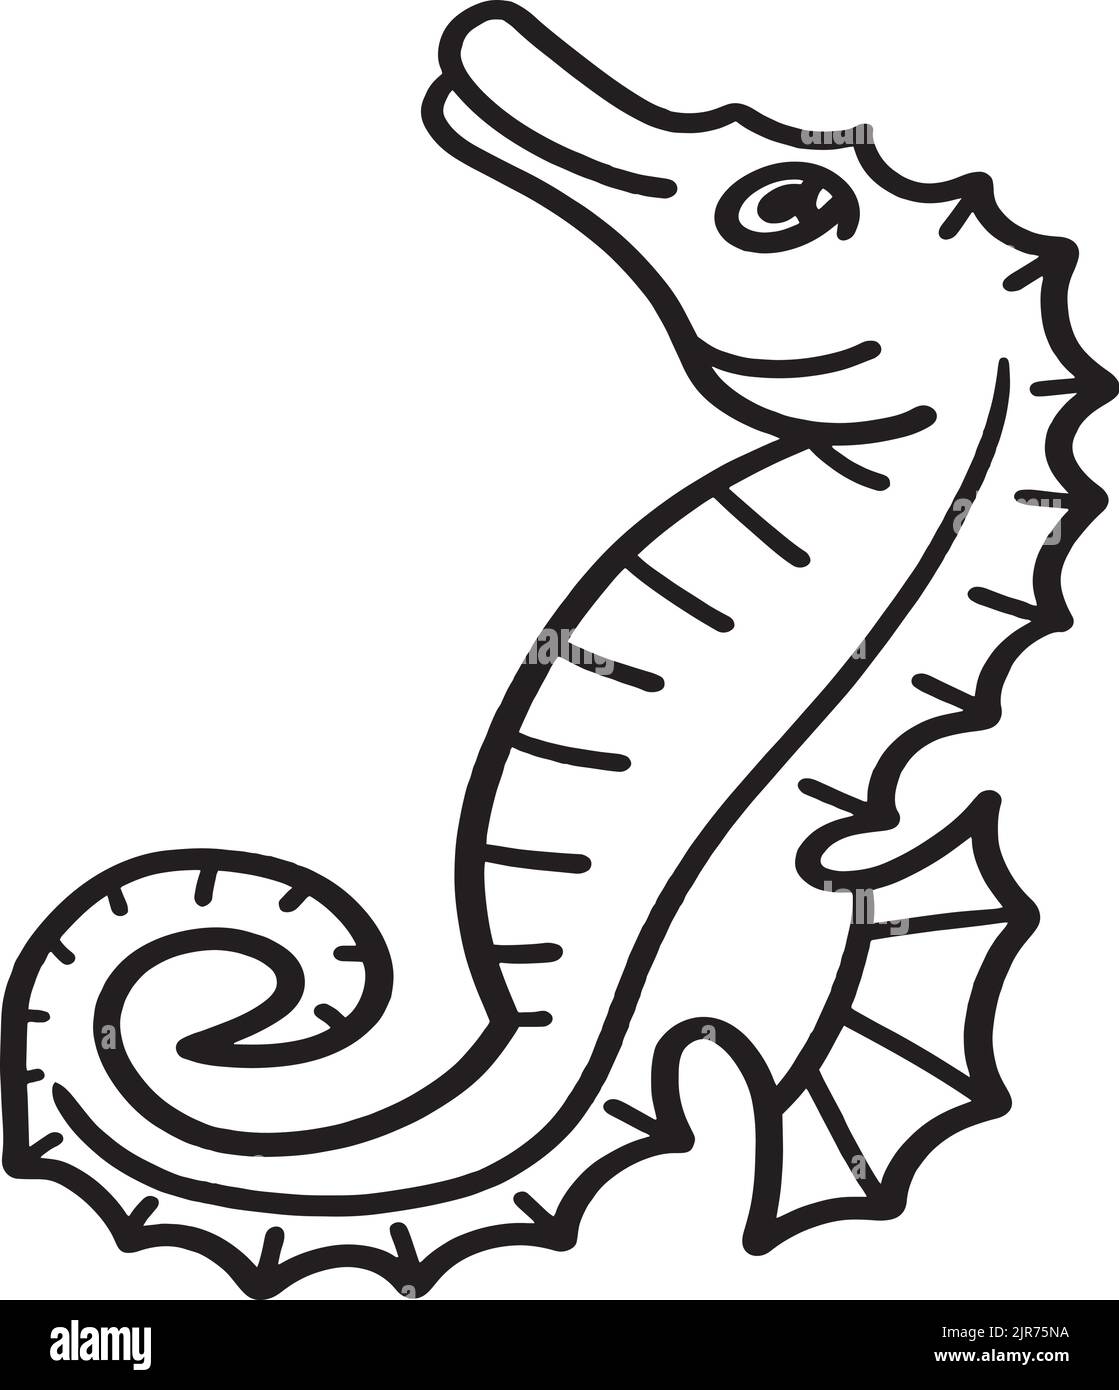 Sea Horse Isolated Coloring Page for Kids Stock Vector